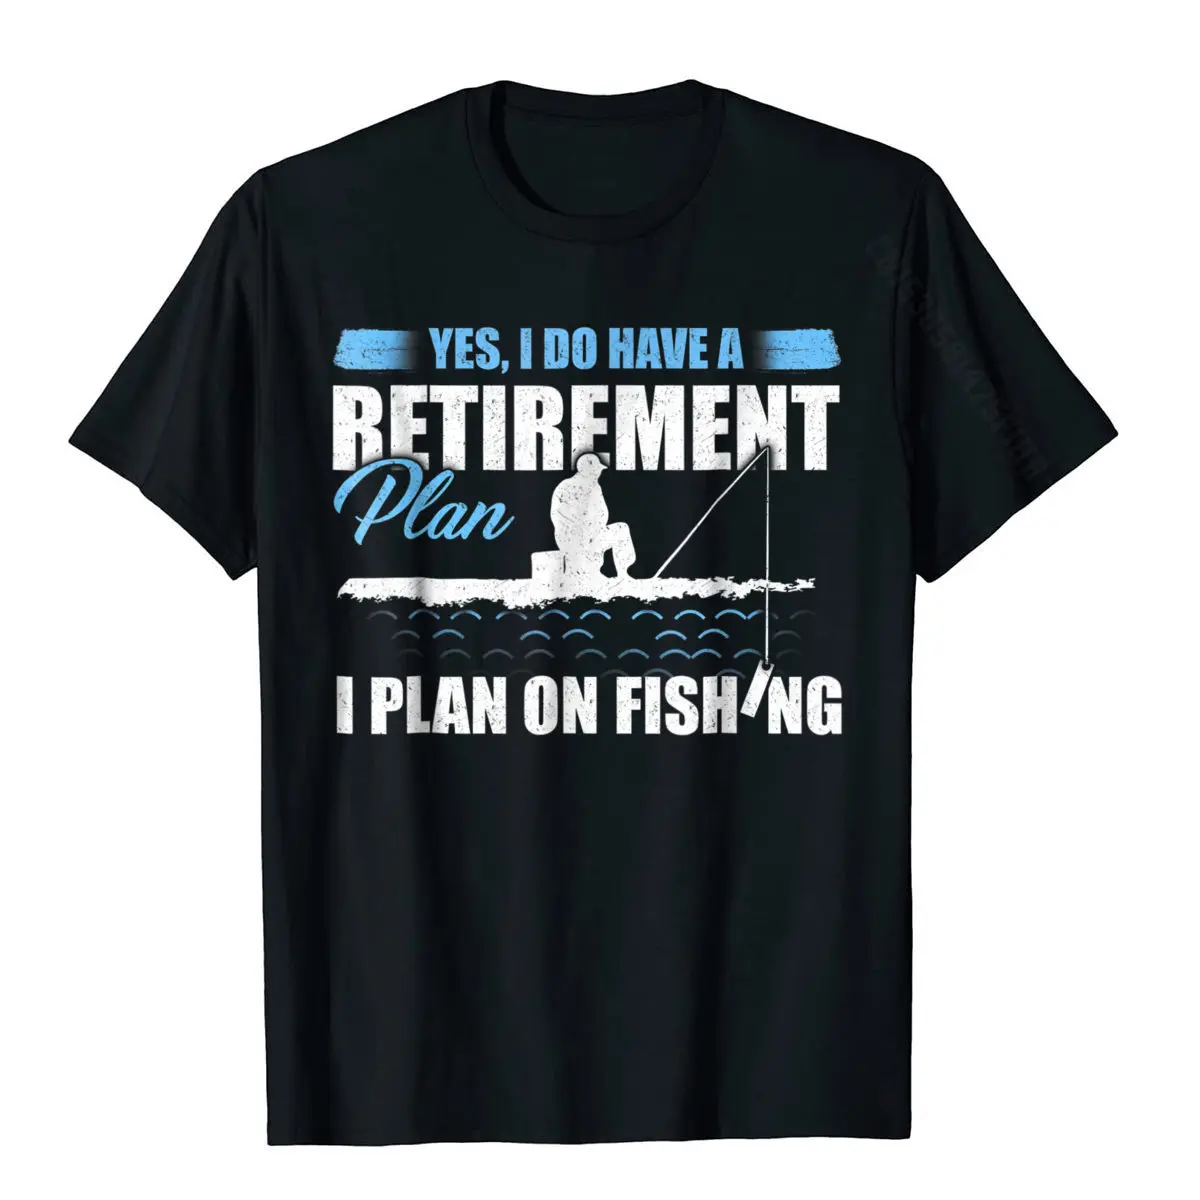 Yes I Do Have A Retirement Plan I Plan On Fishin T-Shirt Cotton Casual Tops T Shirt Brand Men's T Shirts Europe